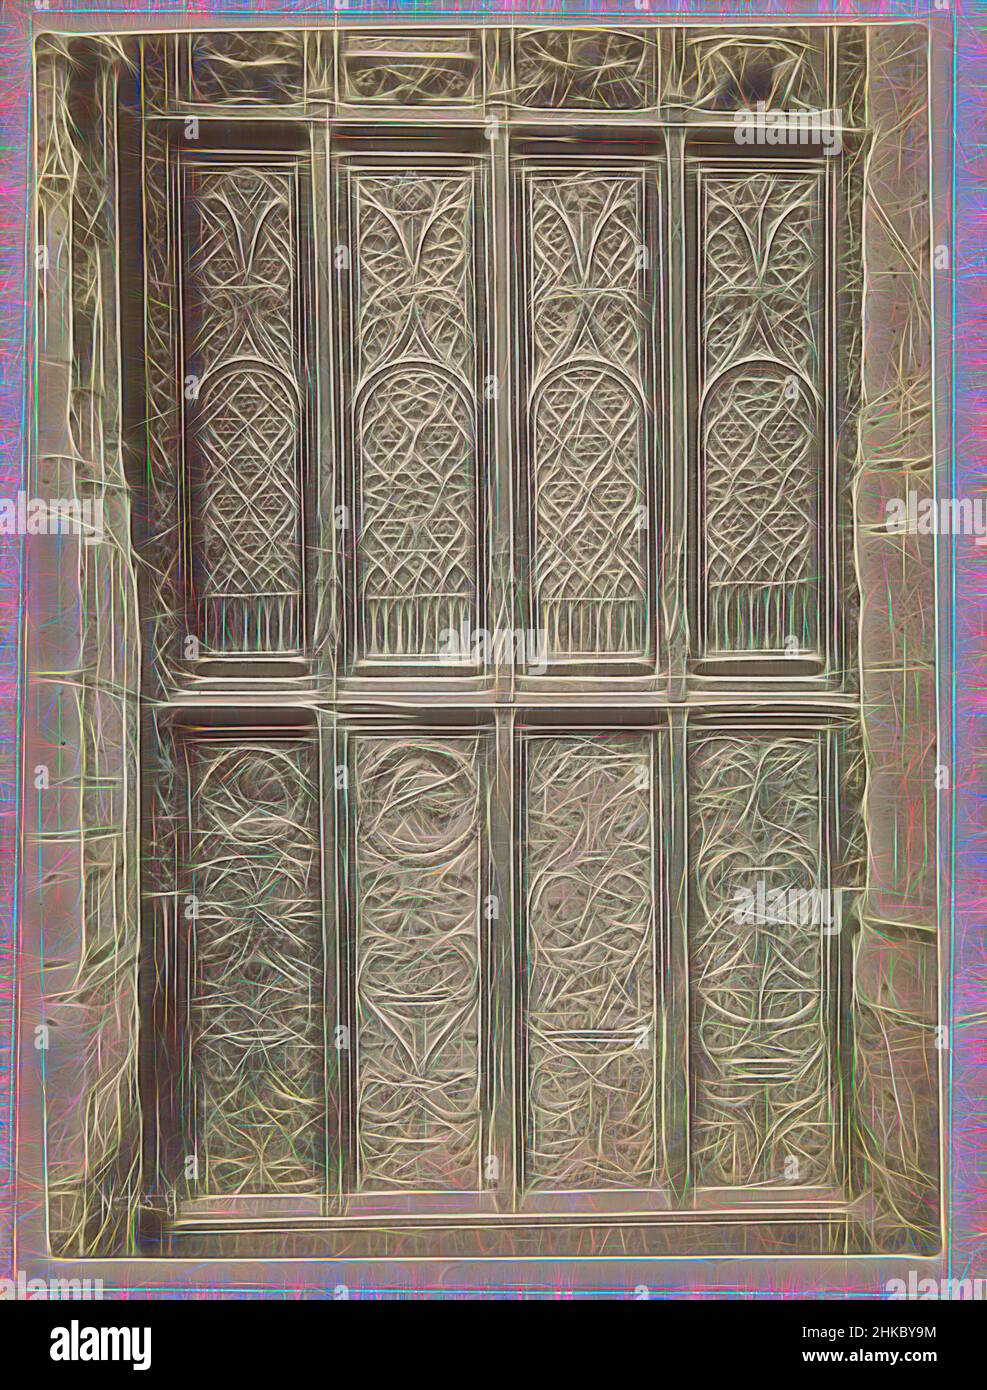 Inspired by Part of the door of the Collegiate Church of Saint-Gervais-Saint-Protais in Gisors, Gisors (Eglise, Porte), Séraphin-Médéric Mieusement, Gisors, c. 1875 - c. 1900, albumen print, height 370 mm × width 272 mm, Reimagined by Artotop. Classic art reinvented with a modern twist. Design of warm cheerful glowing of brightness and light ray radiance. Photography inspired by surrealism and futurism, embracing dynamic energy of modern technology, movement, speed and revolutionize culture Stock Photo